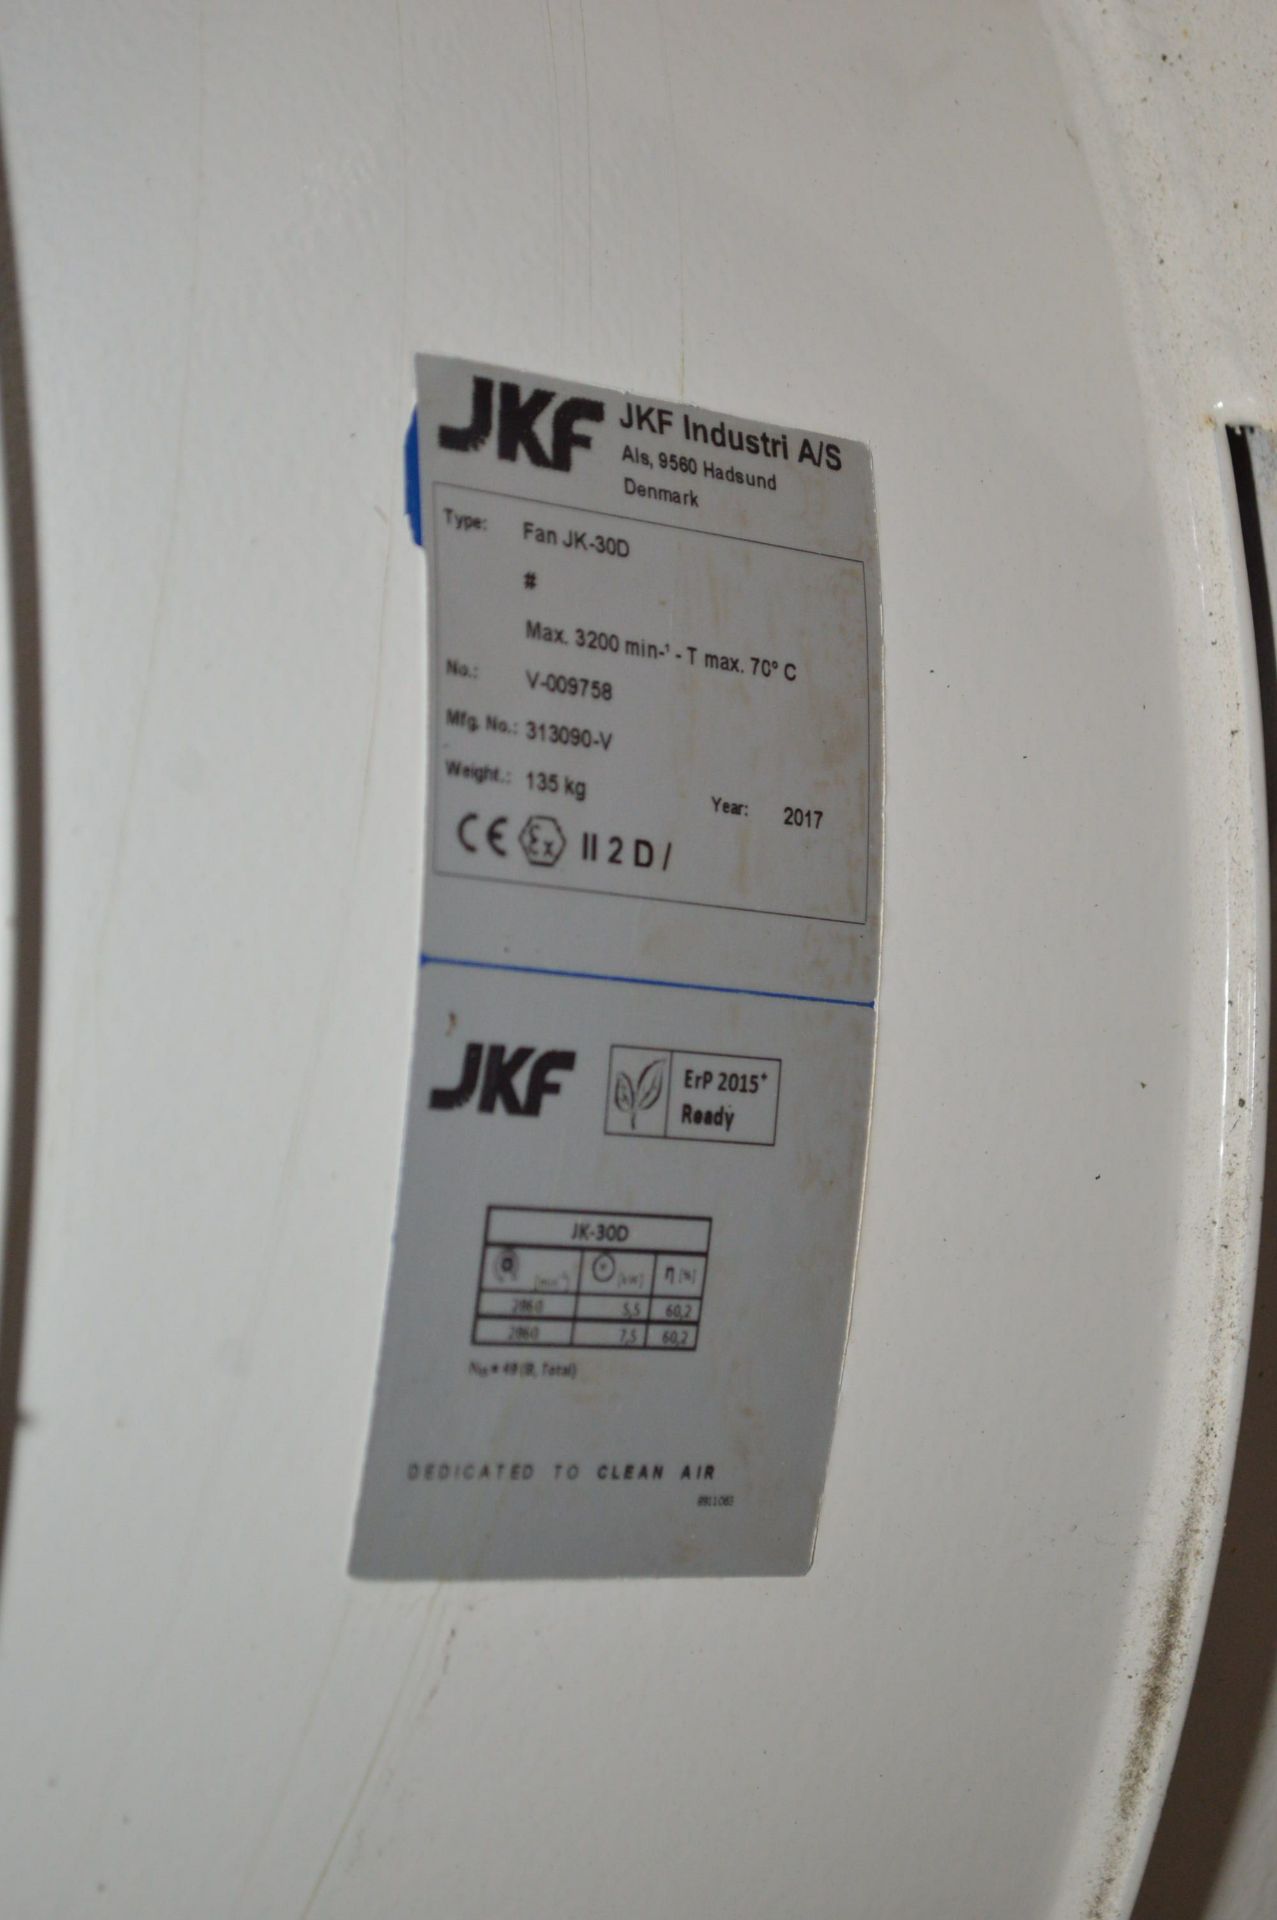 JKF JK-300 Steel Cased Centrifugal Fan, serial no. 313090-V, year of manufacture 2017, (unused), - Image 3 of 3